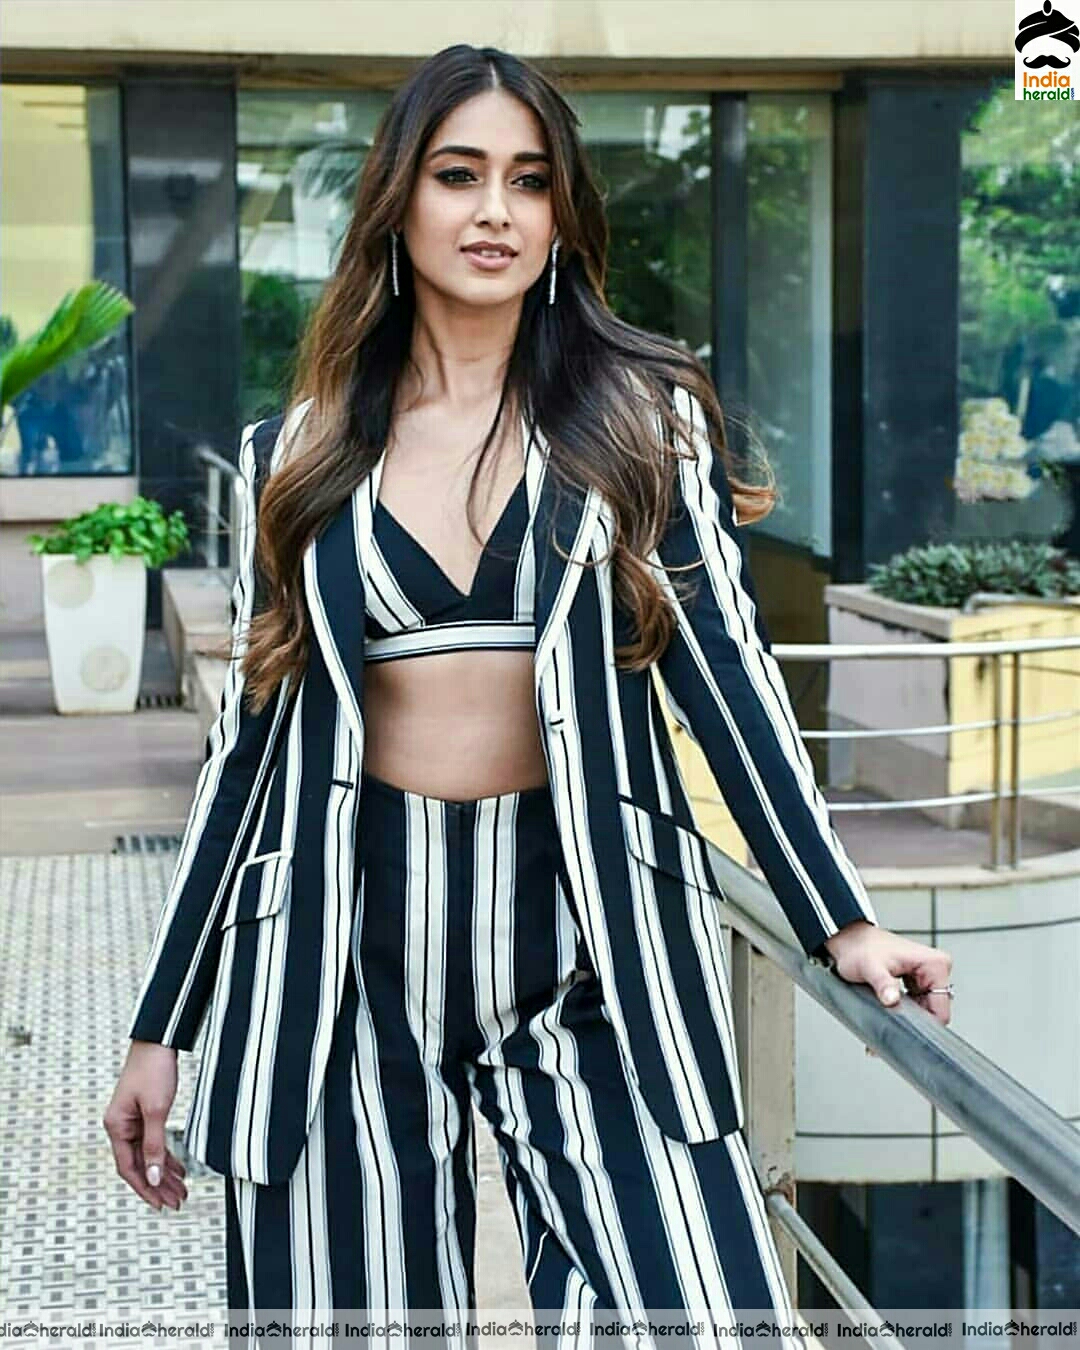 Ileana Hot in Deep Cleavage And Sexy Curves In Black And White Dress